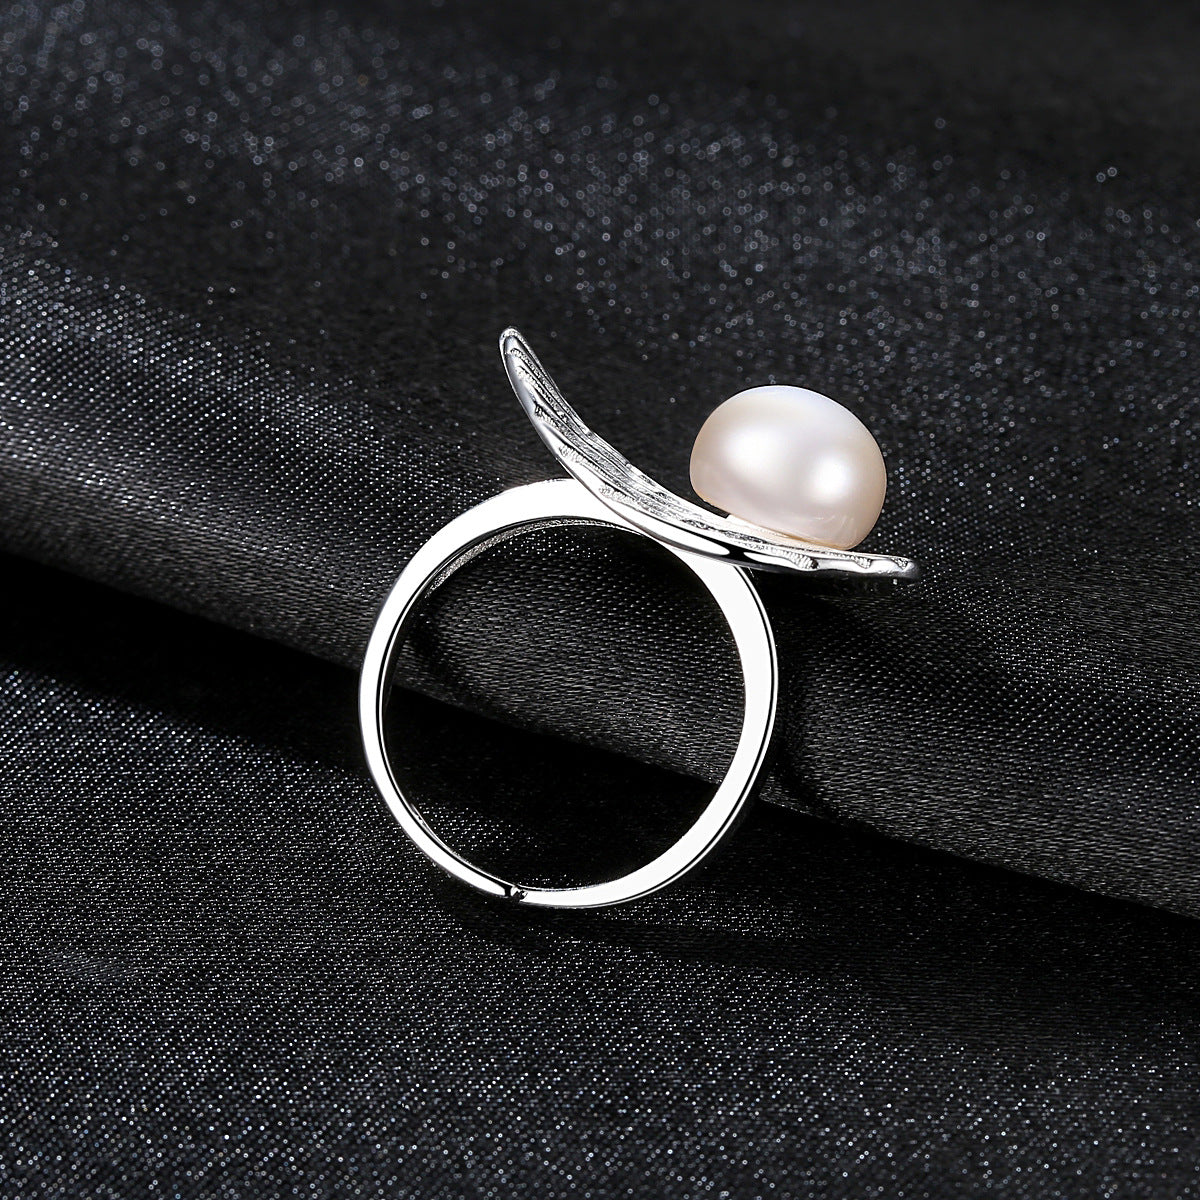 Antique Pearl Ring - HERS